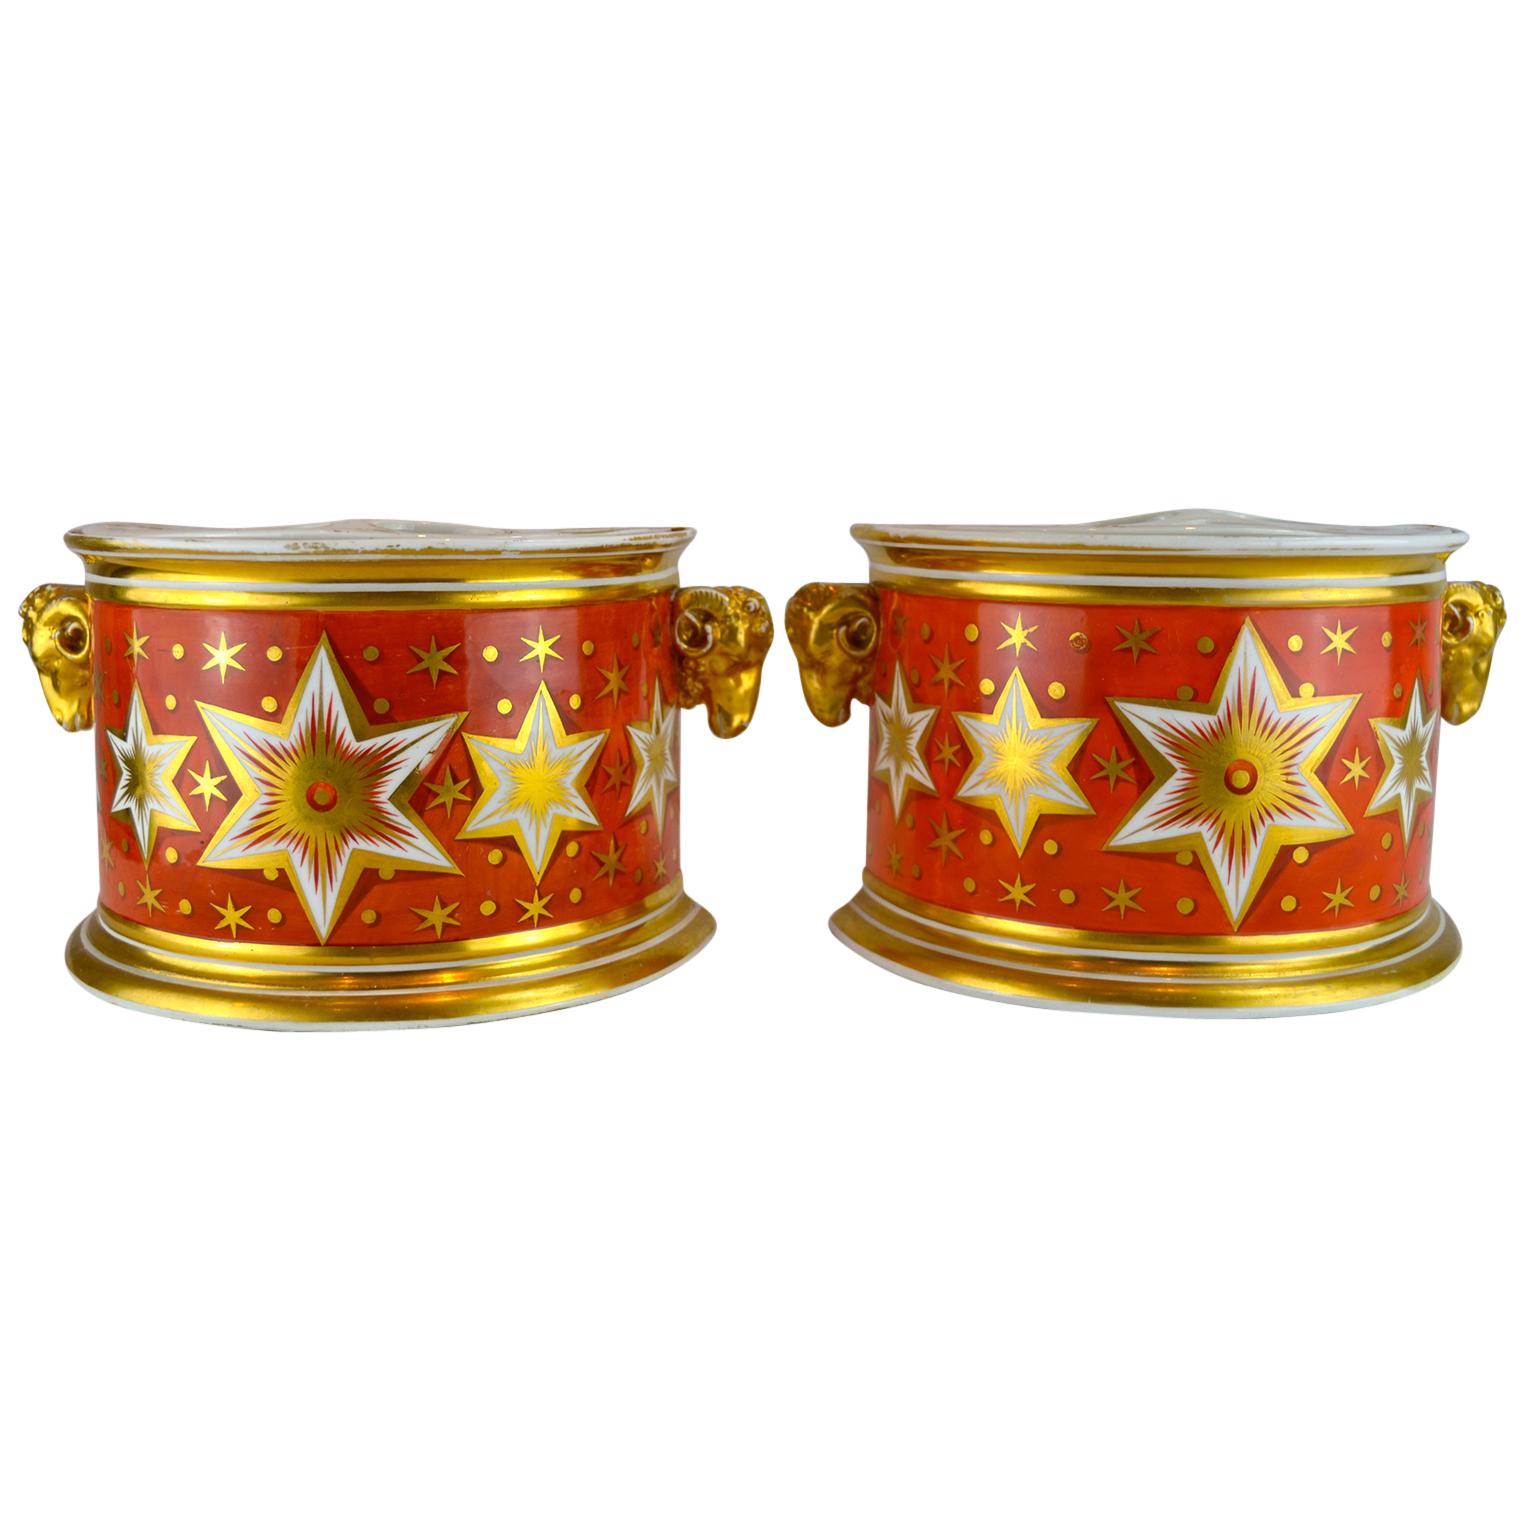 Pair of English early 19th century Worcester demmi=lune bough pots feraturing a rare orange ground with central band of gilded six pointed stars on a white ground. 

The painting and gilding of the Chamberlains Worcester factory met the highest